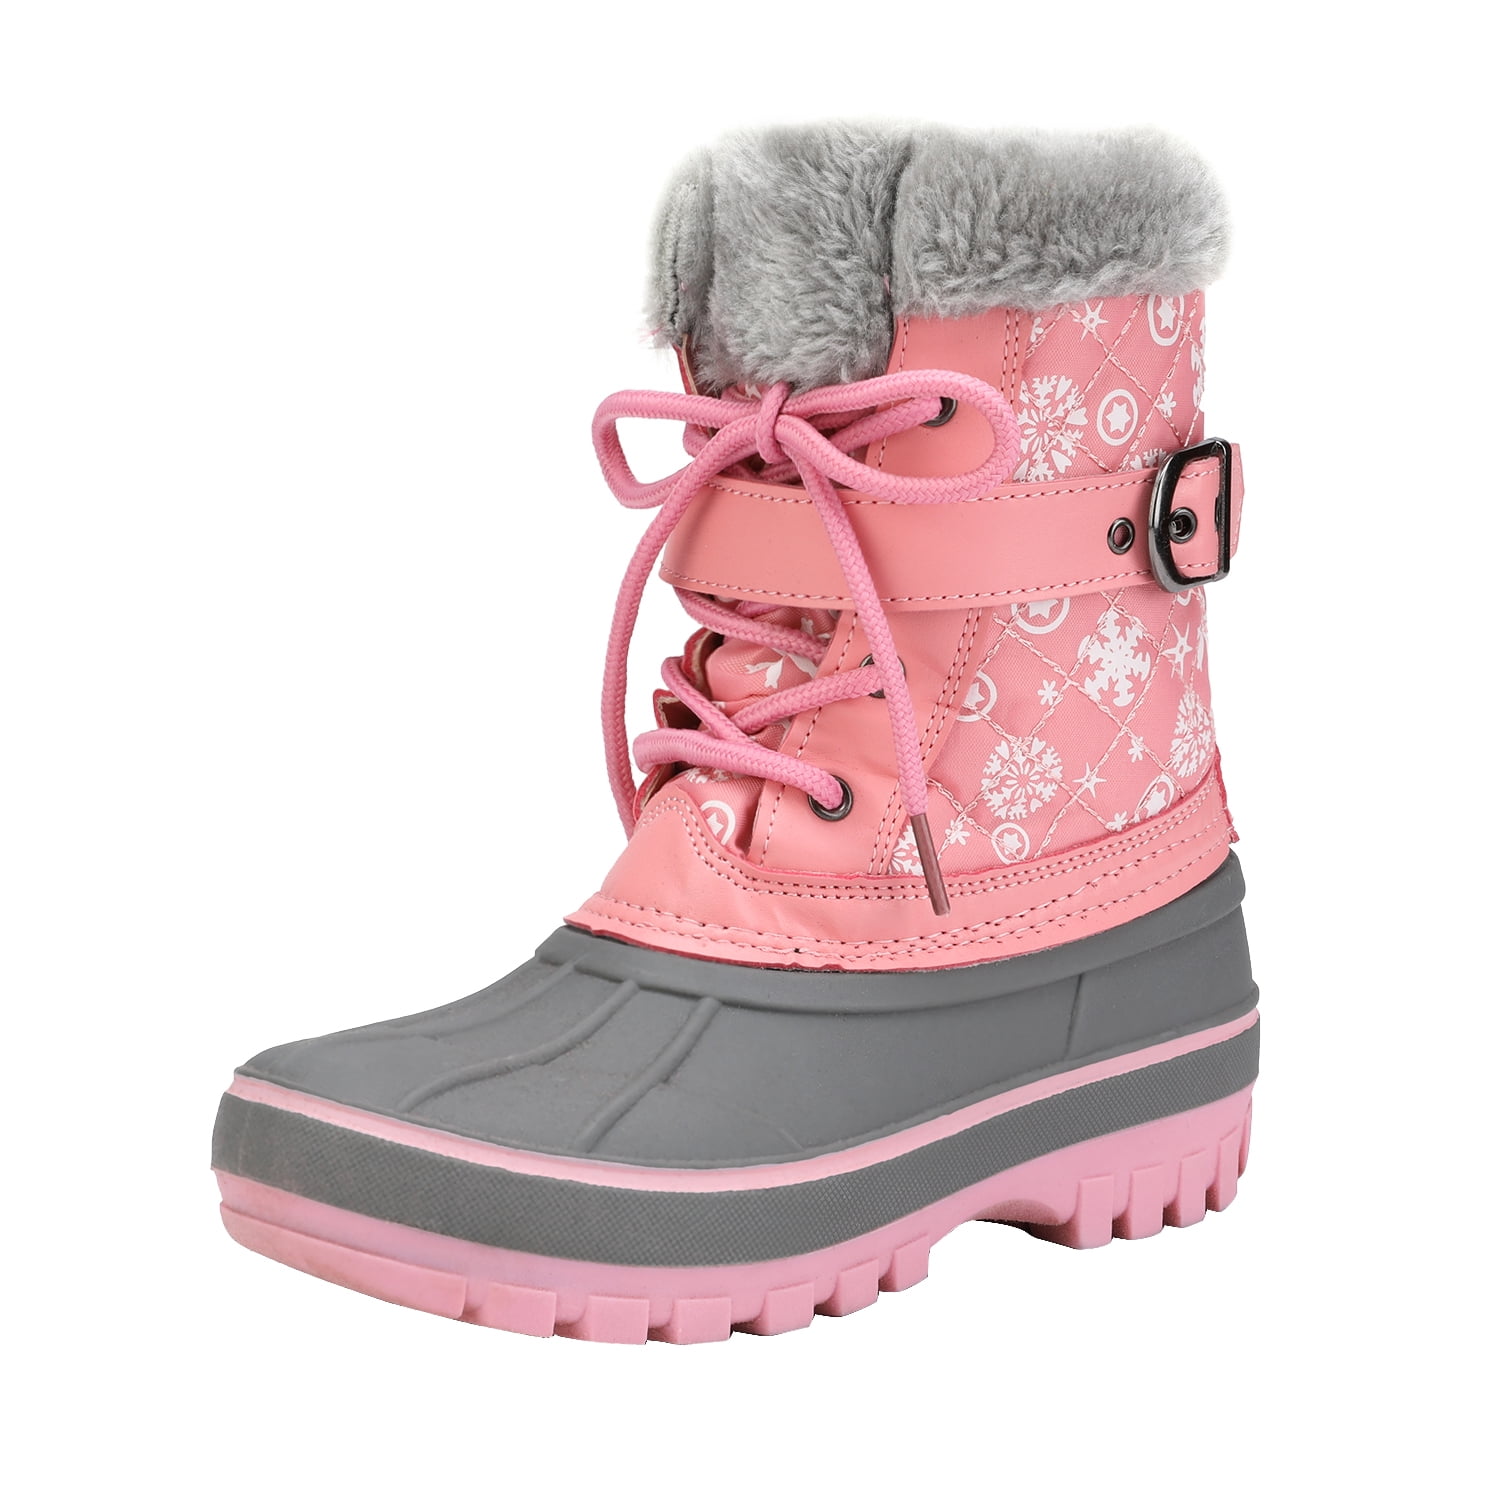 Girls Kid Childrens Casual Flat Winter Faux Fur Ankle Boots Warm Snow Shoes Size 